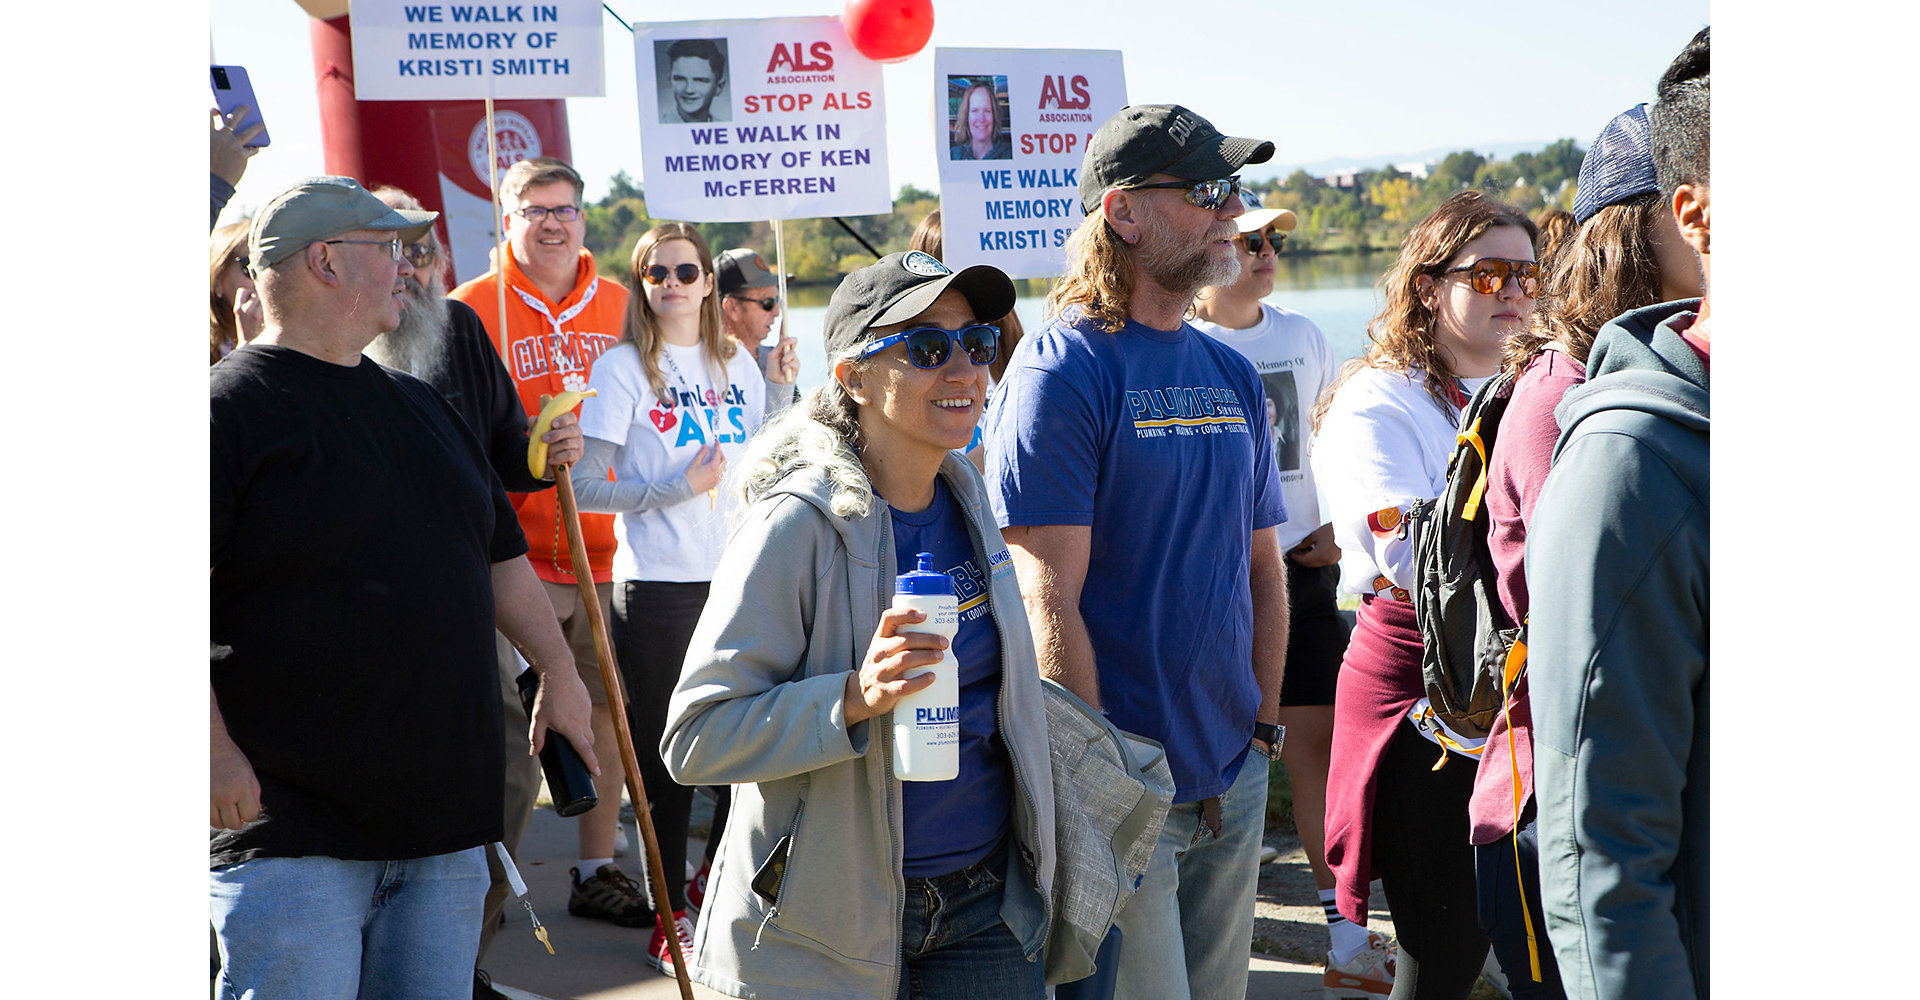 Walking at the ALS event.